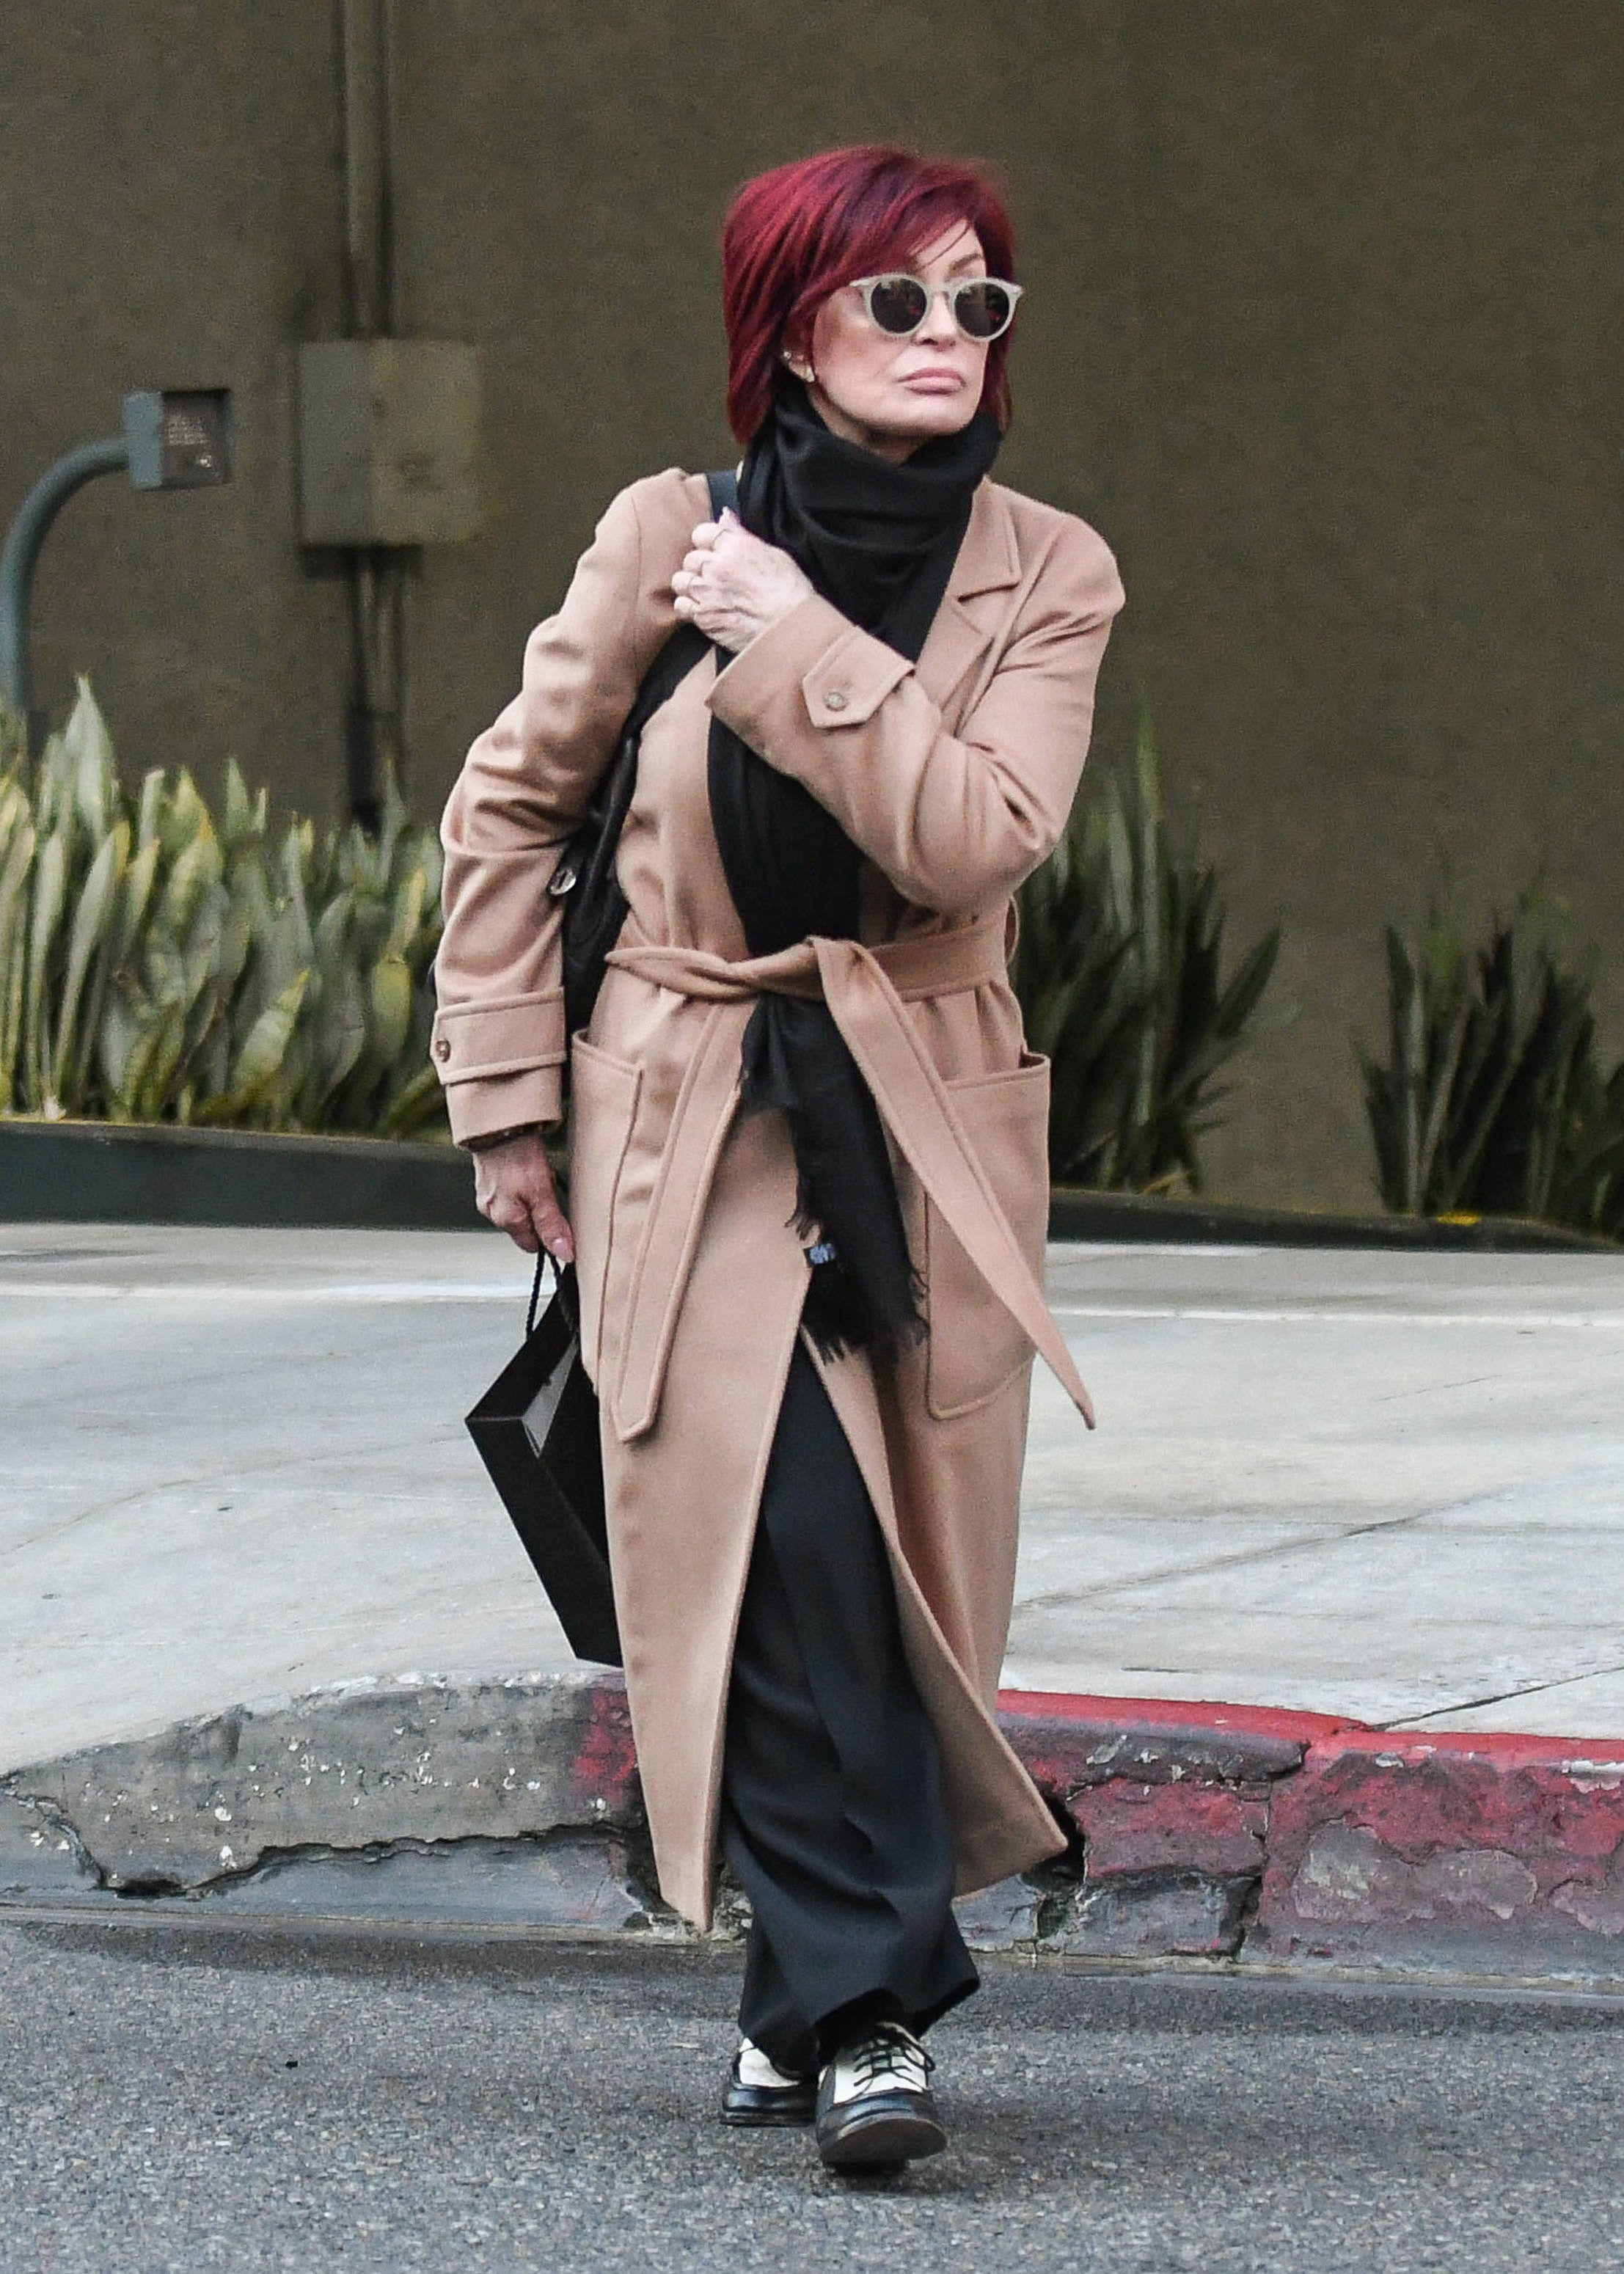 Sharon Osbourne is seen in Los Angeles, California on January 08, 2020. | Source: Getty Images